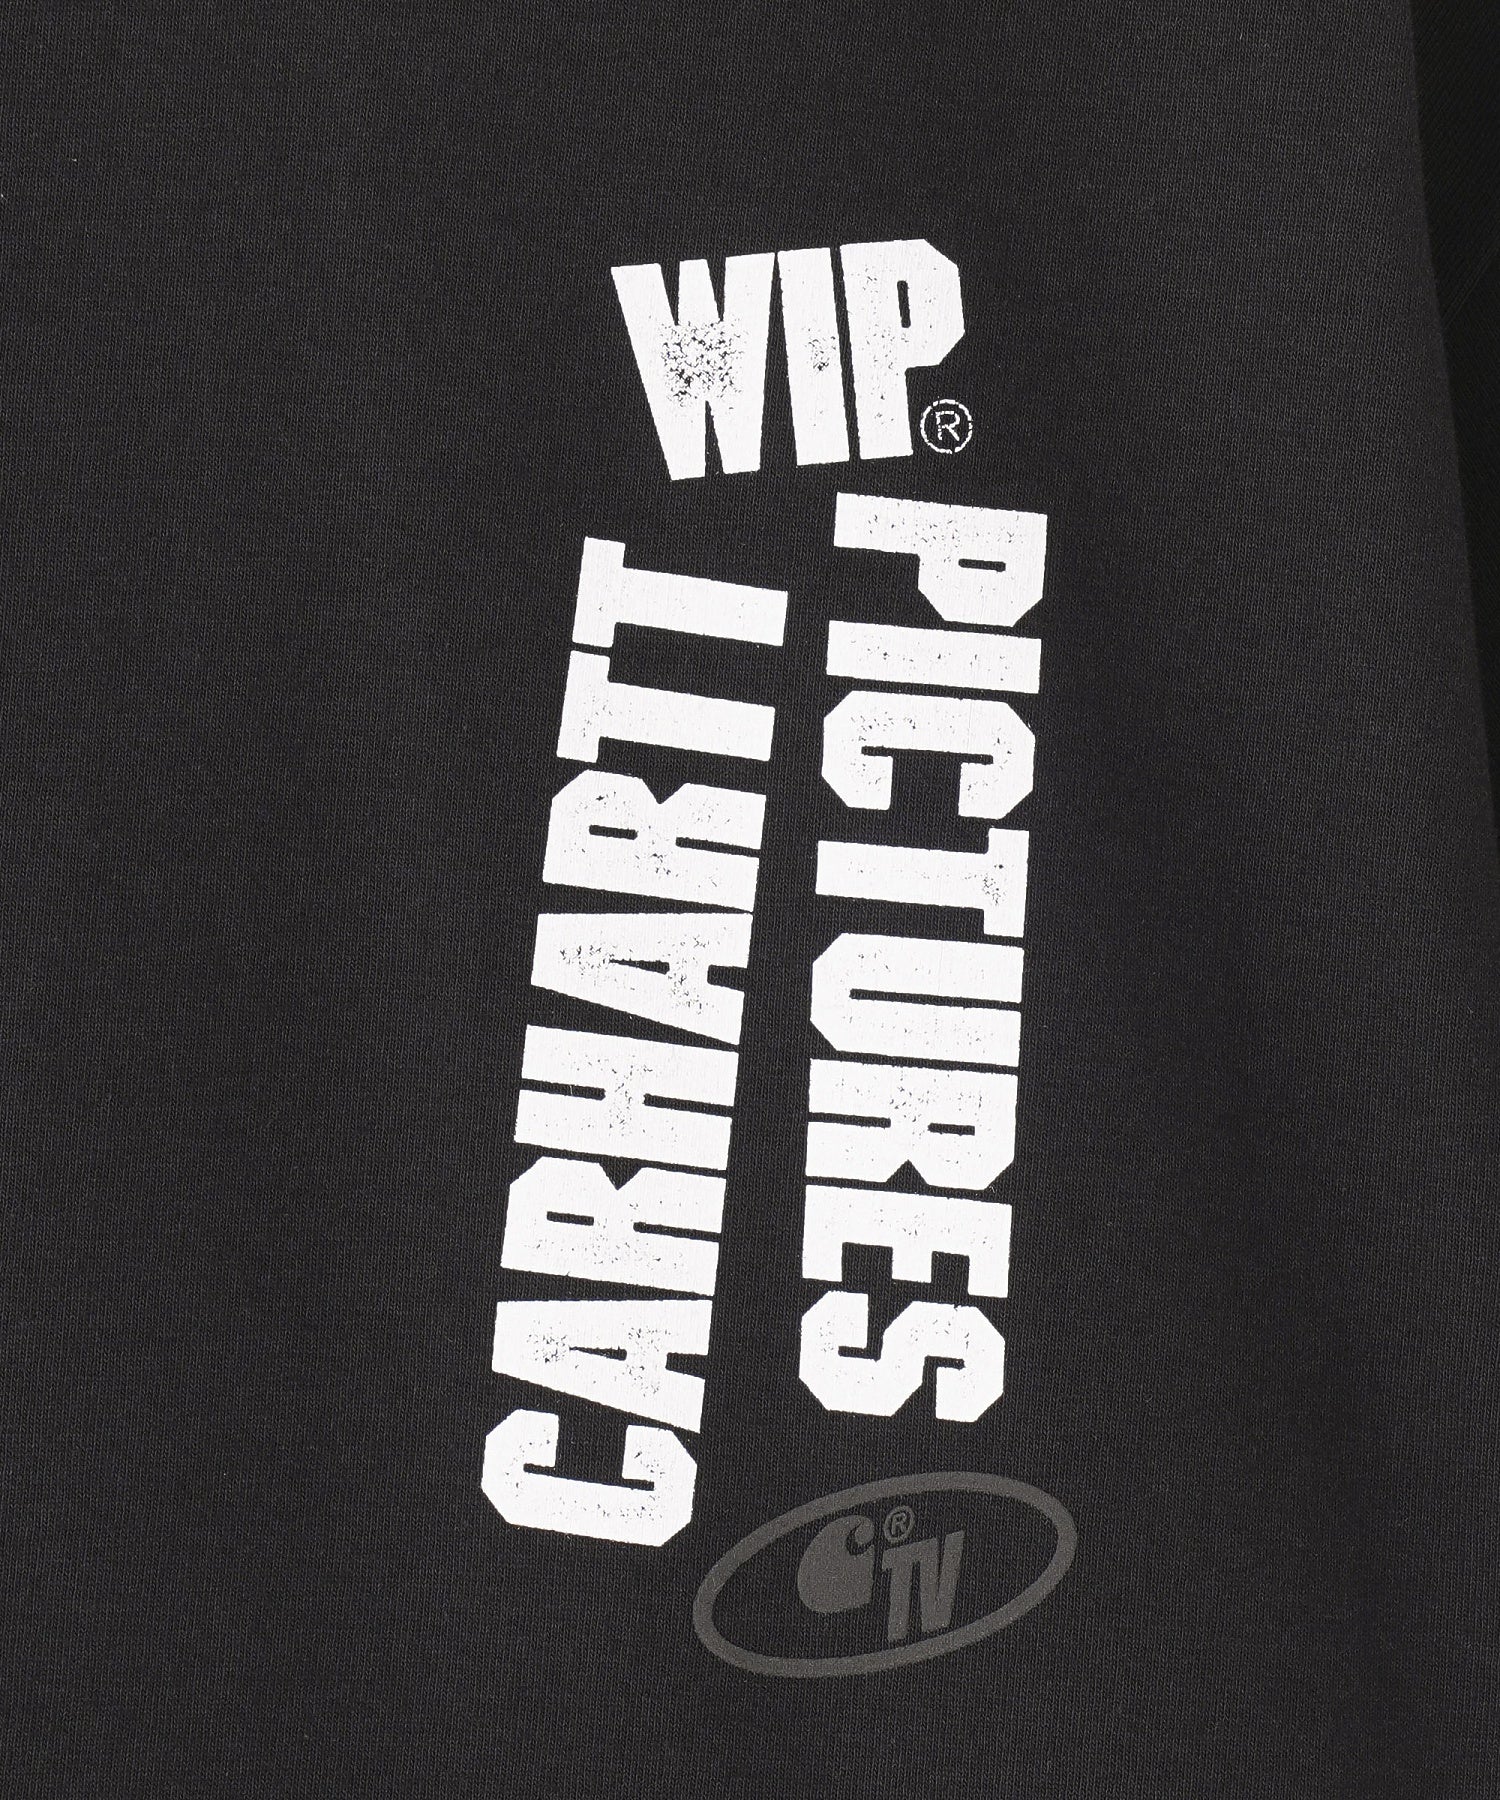 CARHARTT WIP/カーハート/S/S WIP PICTURES T-SHIRT/I033263